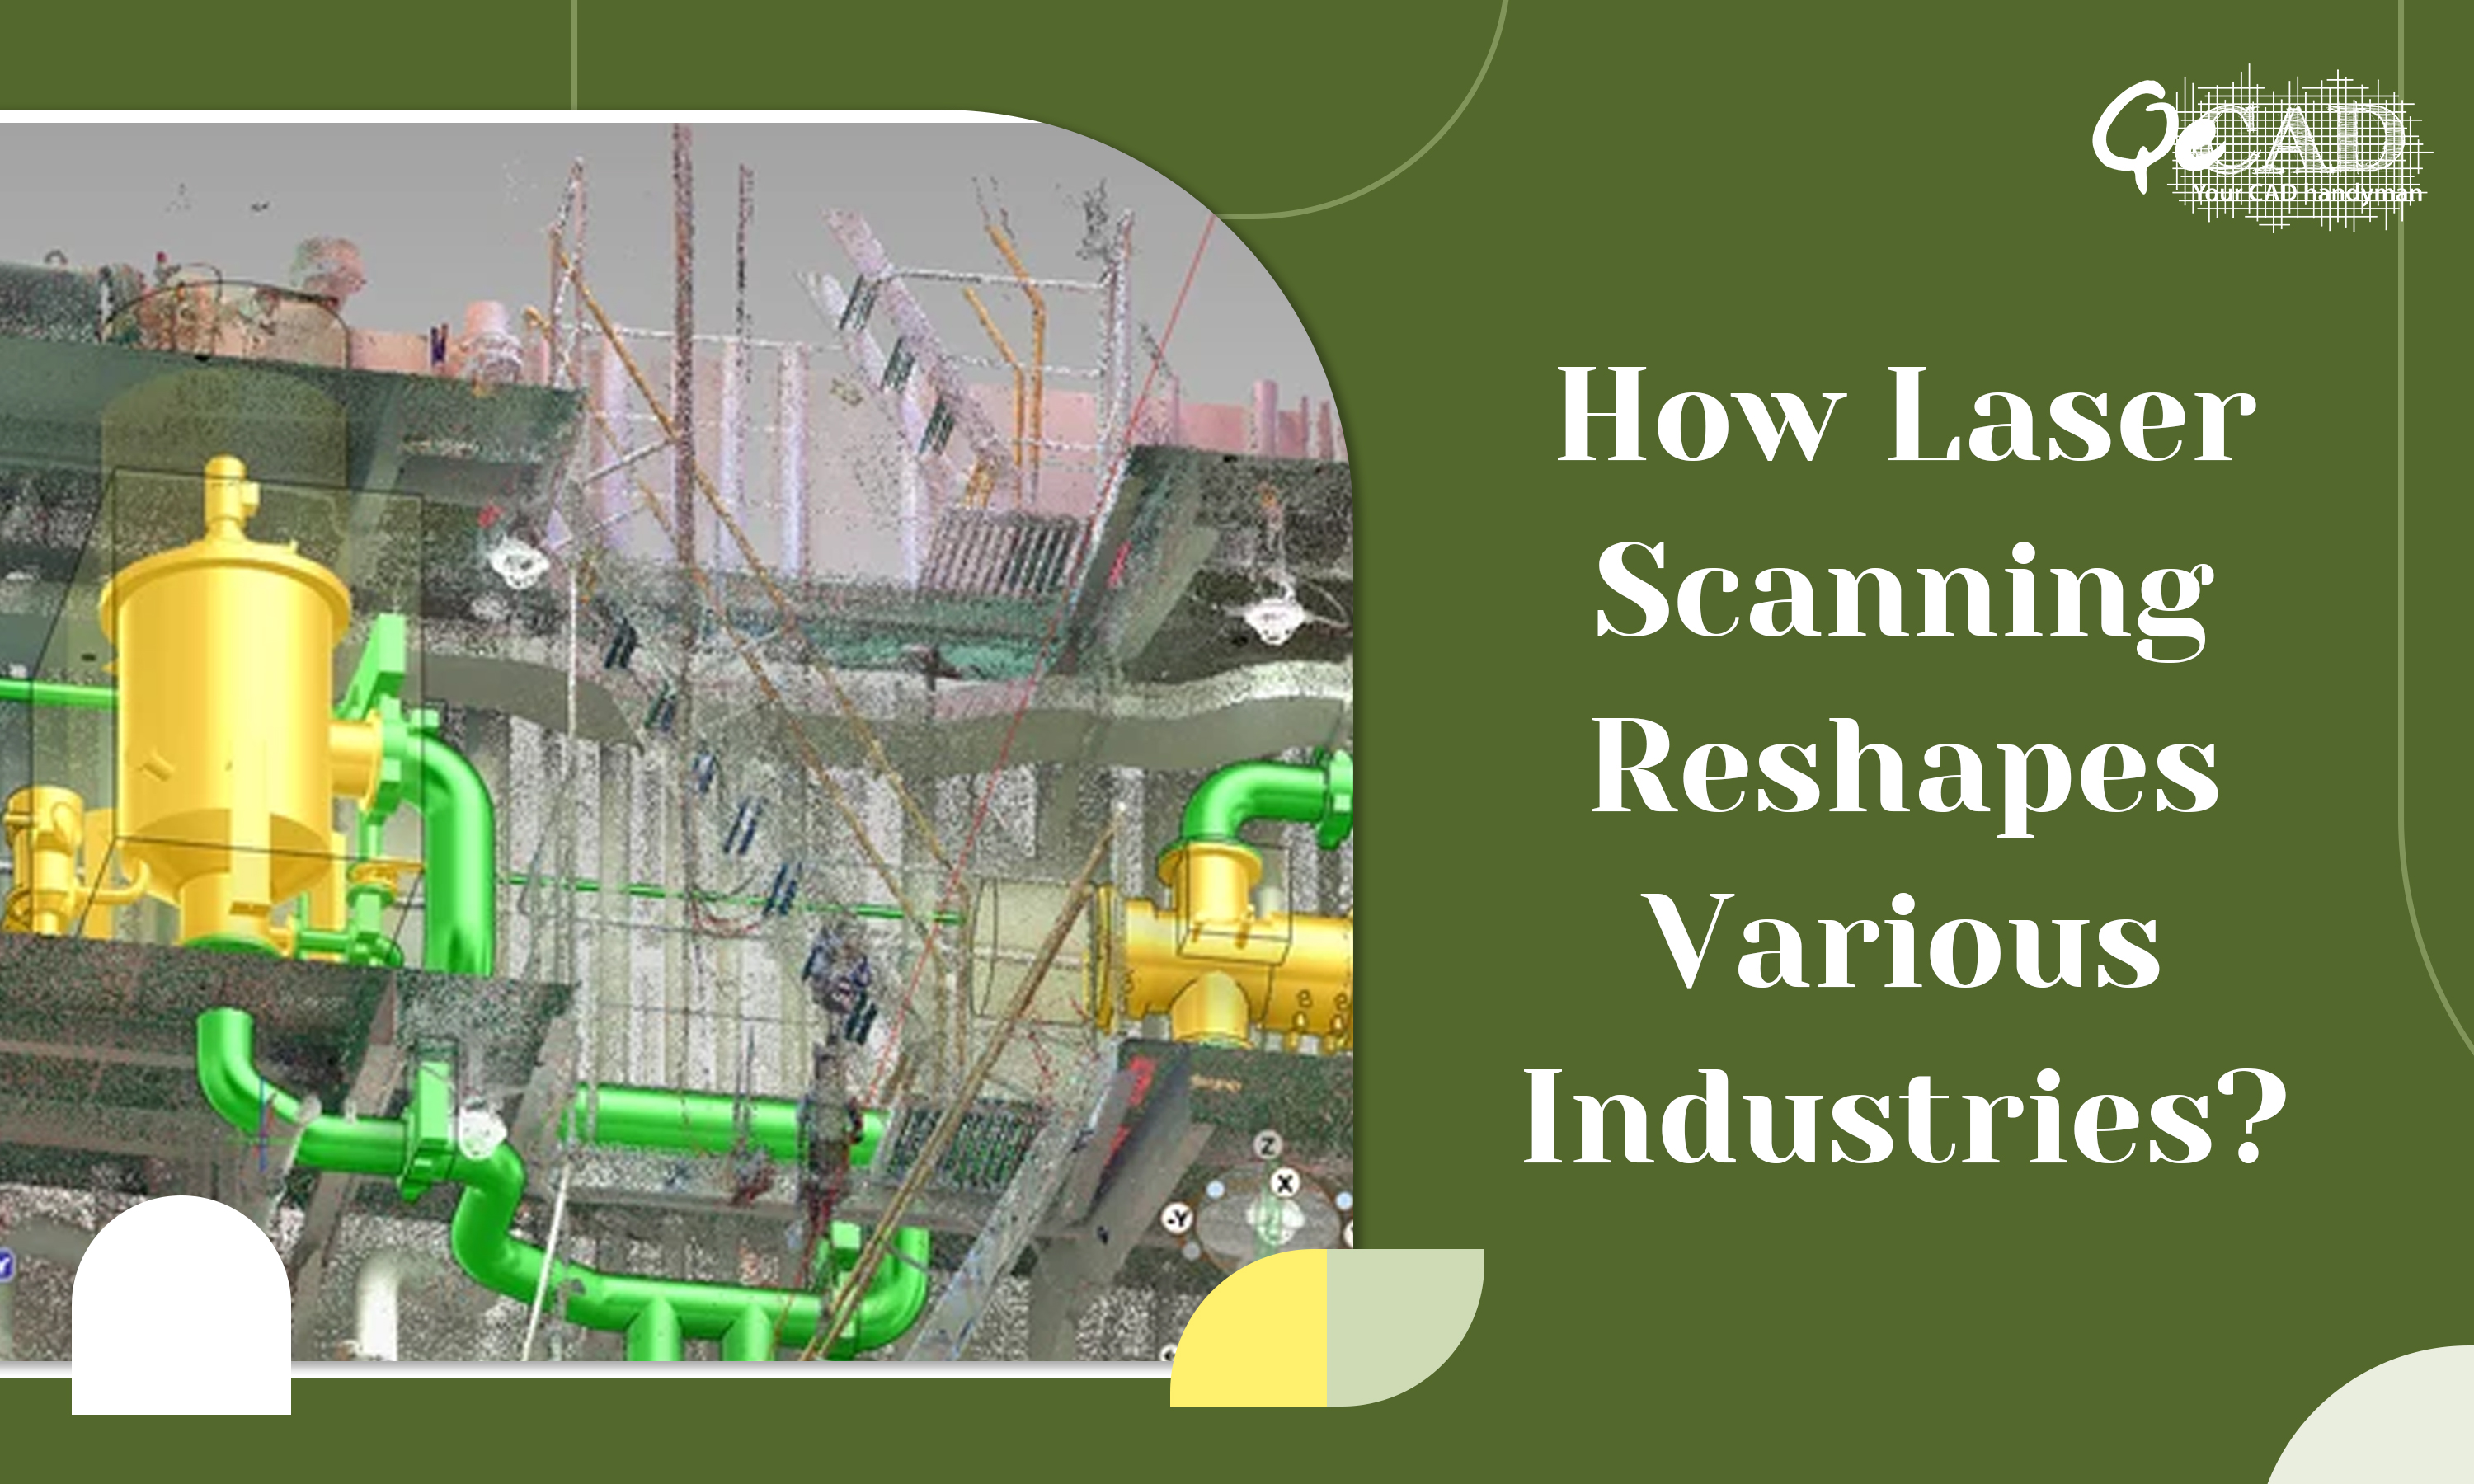 How Laser Scanning Reshapes Various Industries?